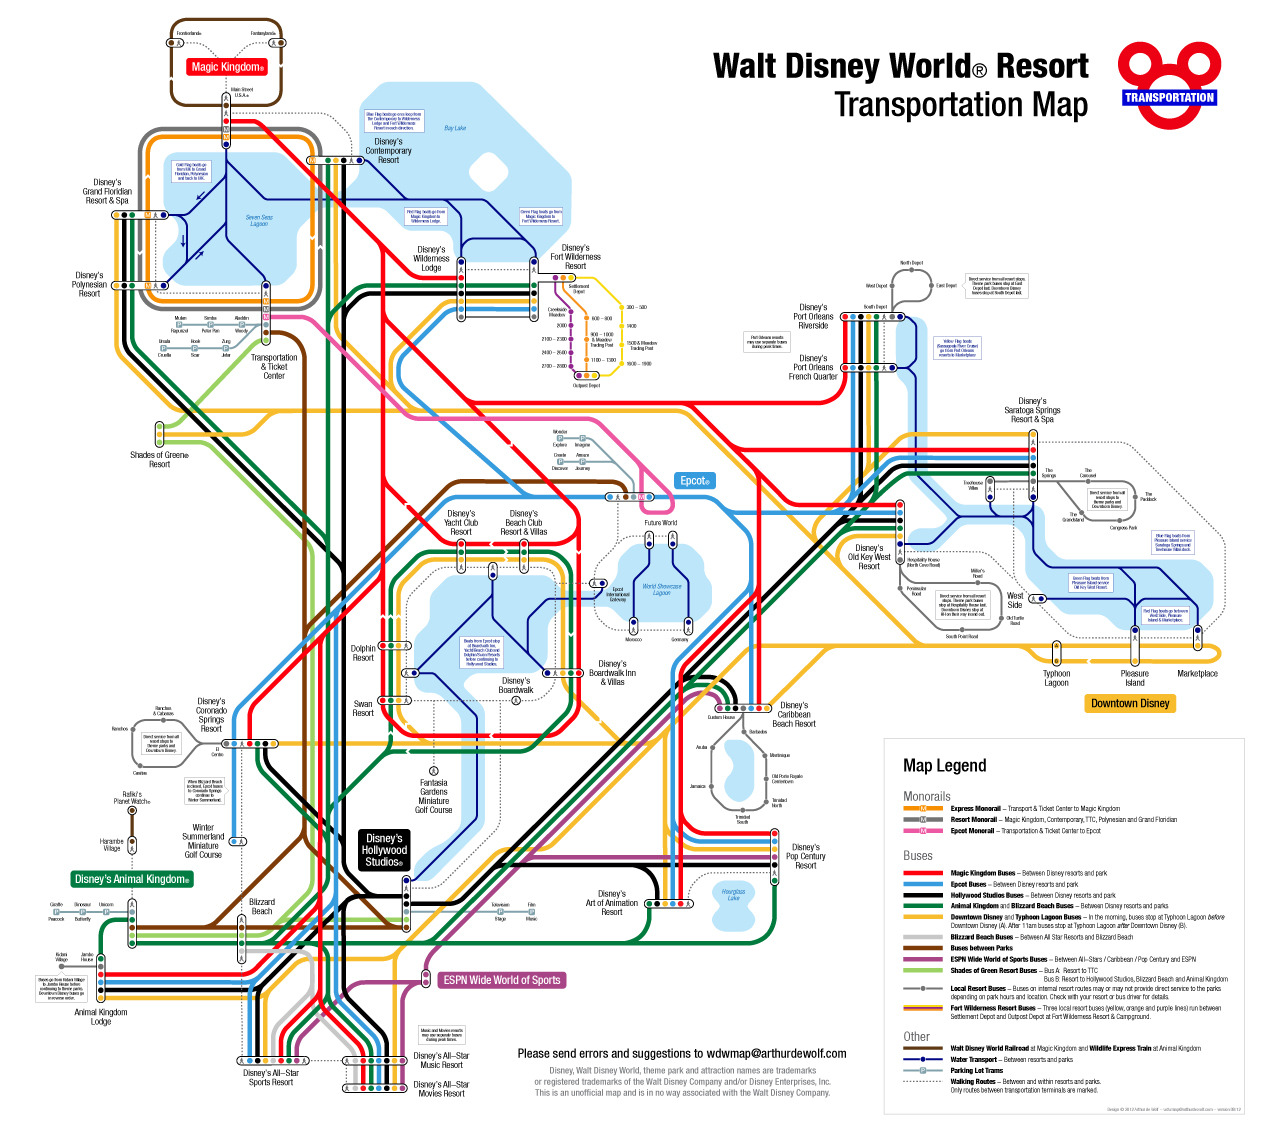 Unofficial Map: Transportation of Walt Disney World Resort, Florida
Here&#8217;s a seriously impressive piece of work by Arthur de Wolf that I came across while trawling Flickr. This map shows transportation options at the Walt Disney World Resort in Florida - monorail, bus, water transportation, parking lot trams, even walking routes between transportation hubs. Walt Disney World Resort is the size of a small city and has a transportation system that puts many of them to shame. Bringing order and sense to this system is no easy feat, and I think that Arthur has done a fantastic-looking job (although I can&#8217;t vouch for the accuracy of the map&#8217;s contents).
Have we been there? No. Maybe when my son is old enough to appreciate it.
What we like: Beautifully executed map that obviously has a lot of research and thought behind it (despite Arthur&#8217;s statements regarding potential errors). Takes a system that&#8217;s as complex as many large cities, and creates order and simplicity out of it. The Mickey Mouse/London Underground Roundel mashup in the top right corner is hilarious.
What we don&#8217;t like: Could use a little more visual differentiation between the monorail and bus services. The &#8220;M&#8221; at stations is a little hard to find when you&#8217;re first scanning the map. Map is maybe a little too sterile for what is an enormous theme park.
Our rating: Fantastic work that shows a complex system with remarkable clarity. Four-and-a-half-stars! Be sure to click through to the image on Flickr where you can view it large!

(Source: wolfstad/Flickr)